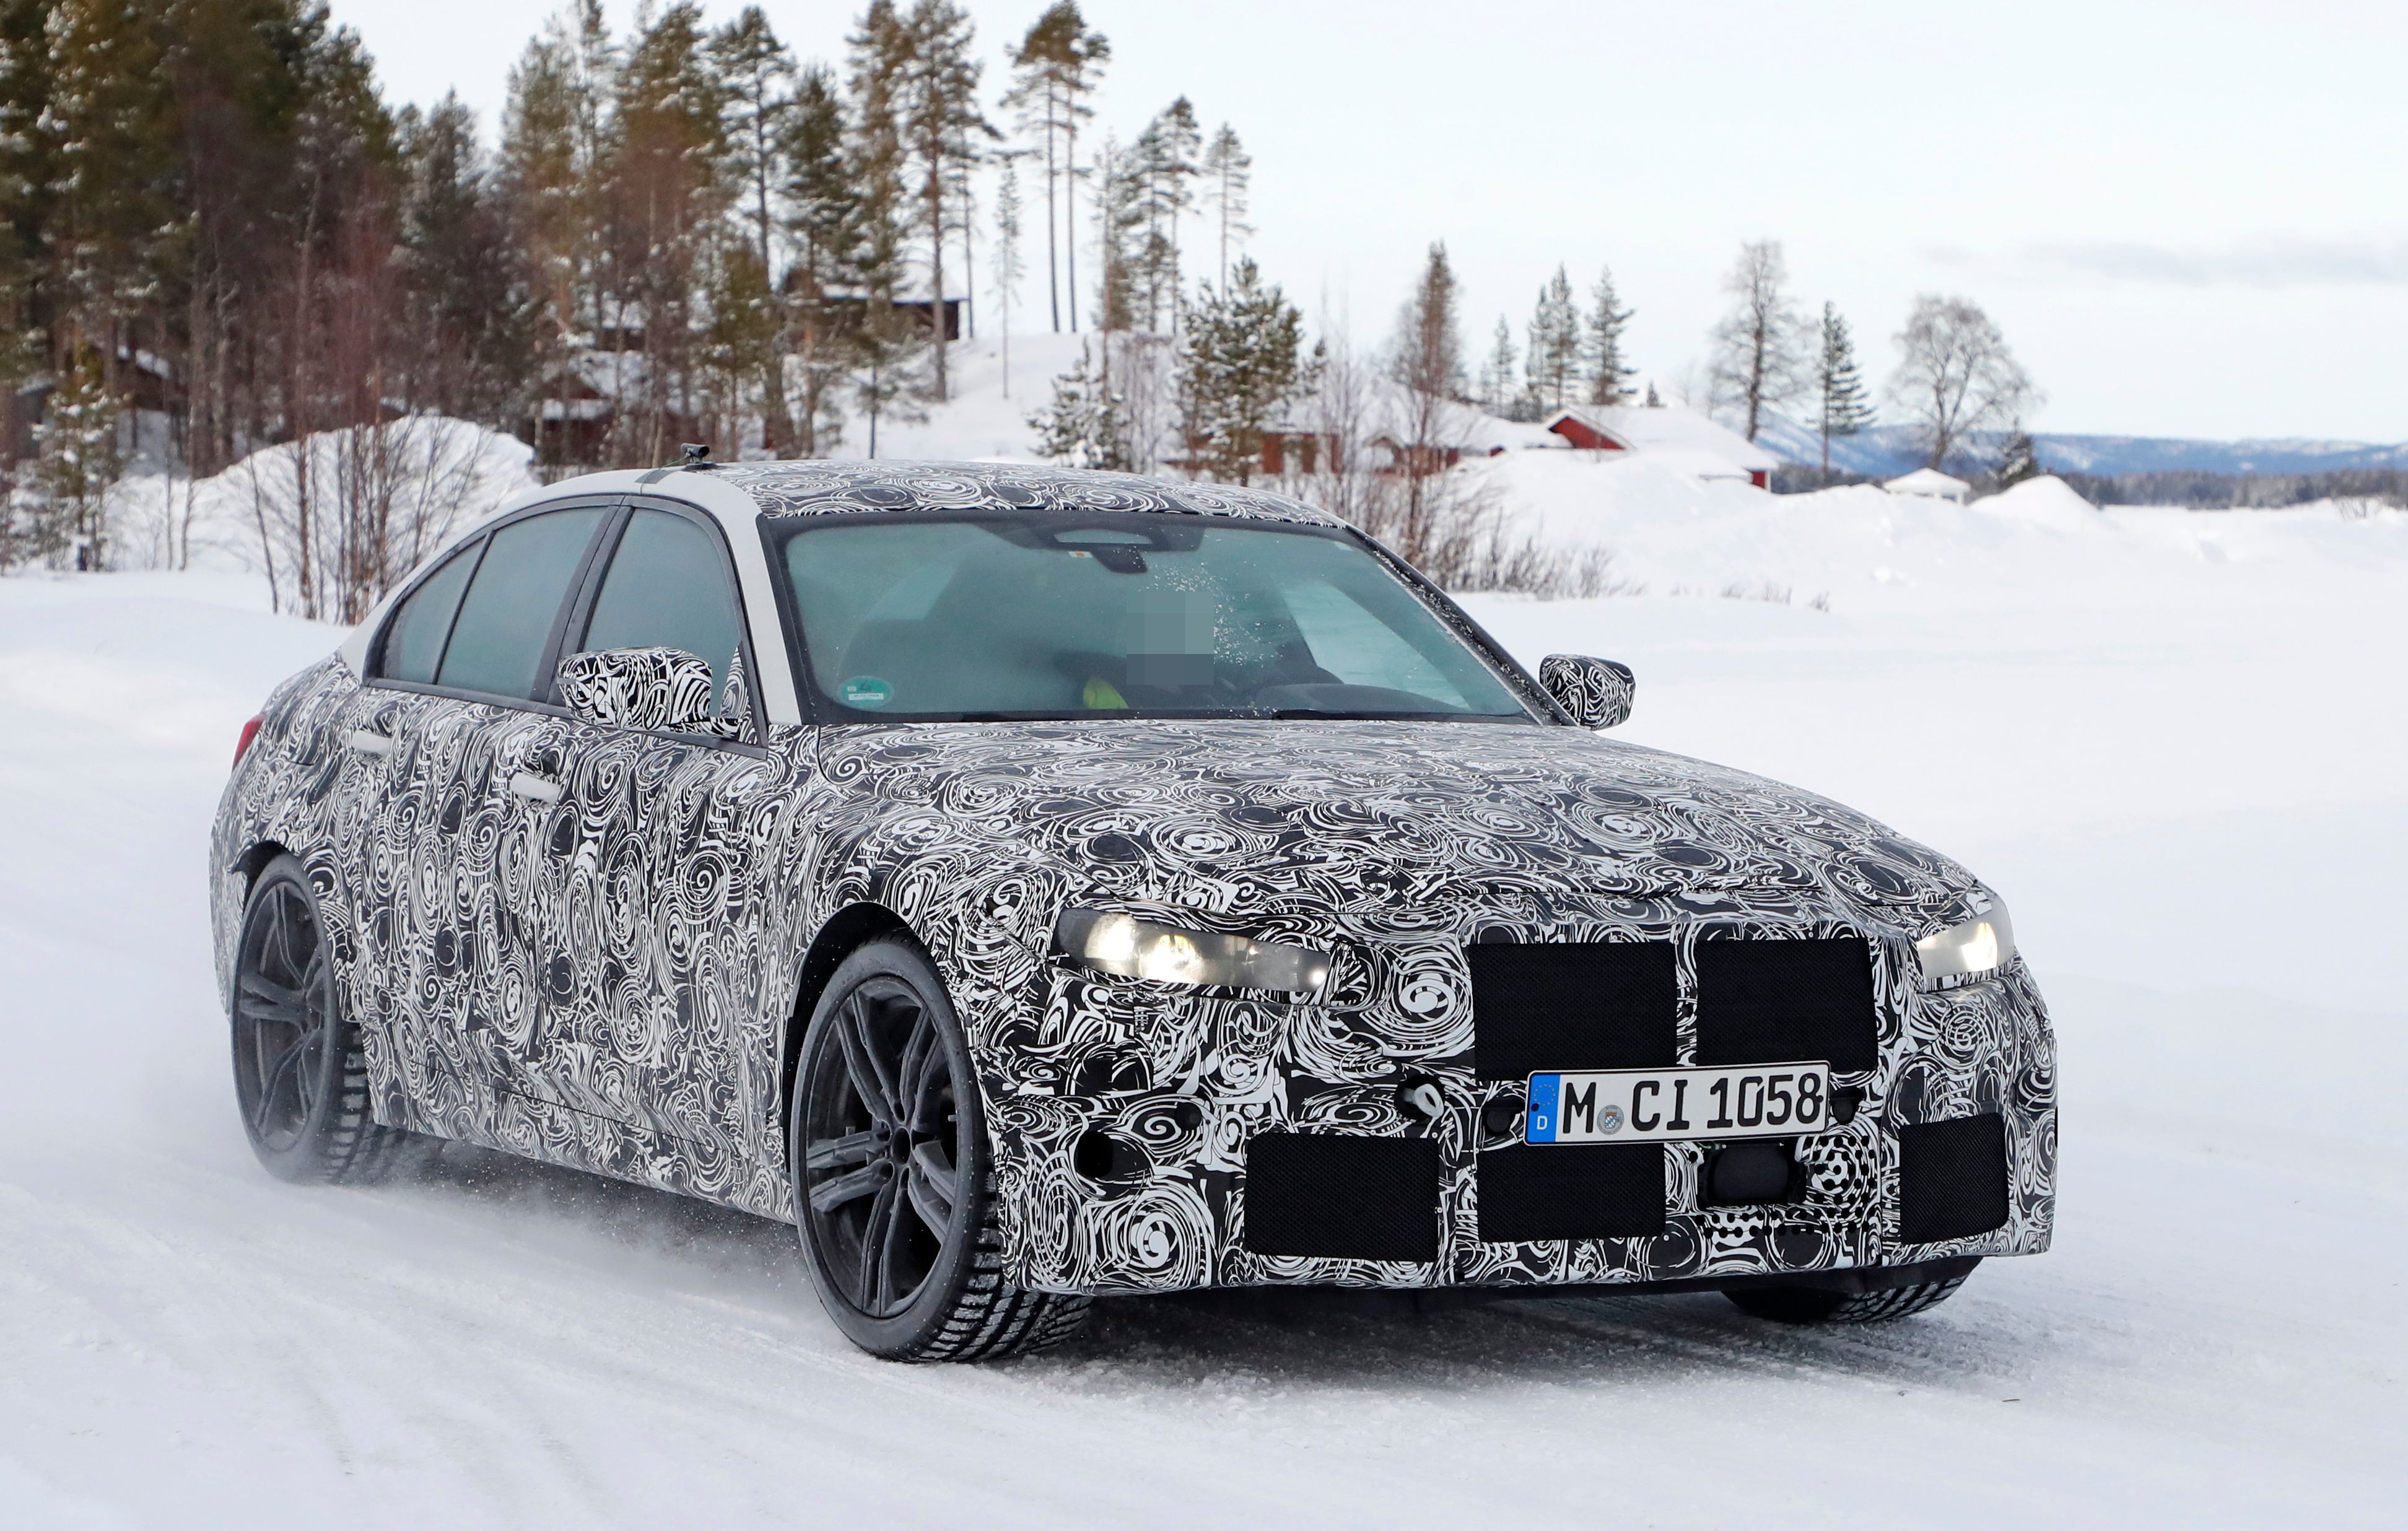 Thanks to BMW’s S58 Engine, the 2020 BMW M3 Could Offer As Much as 480 Horsepower in Base Form